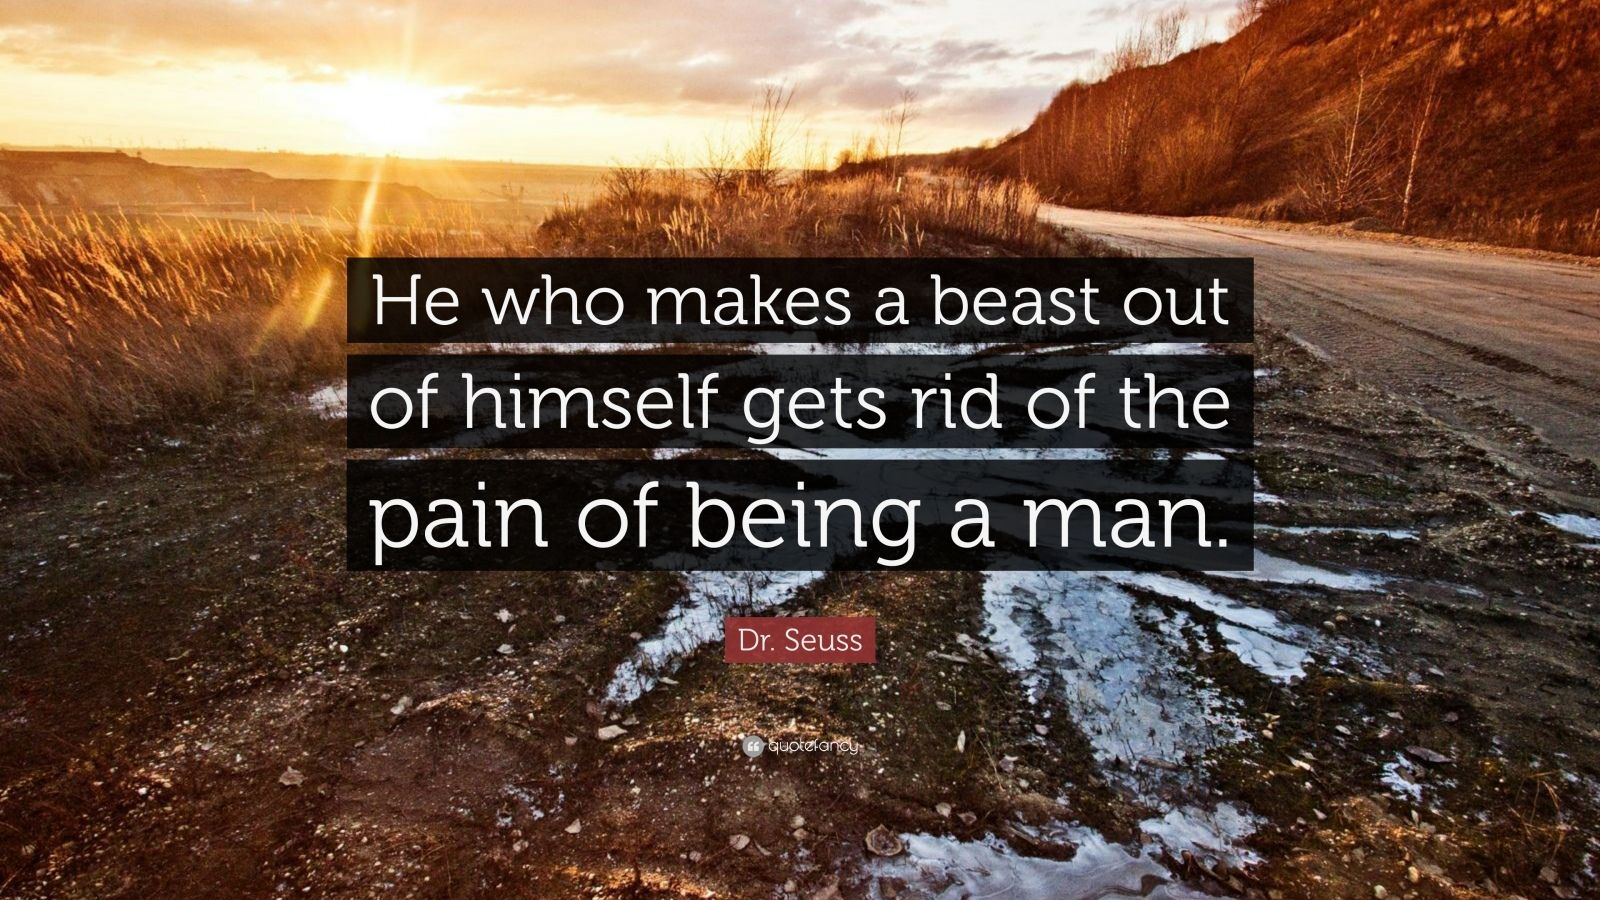 Dr. Seuss Quote: “He who makes a beast out of himself gets rid of the